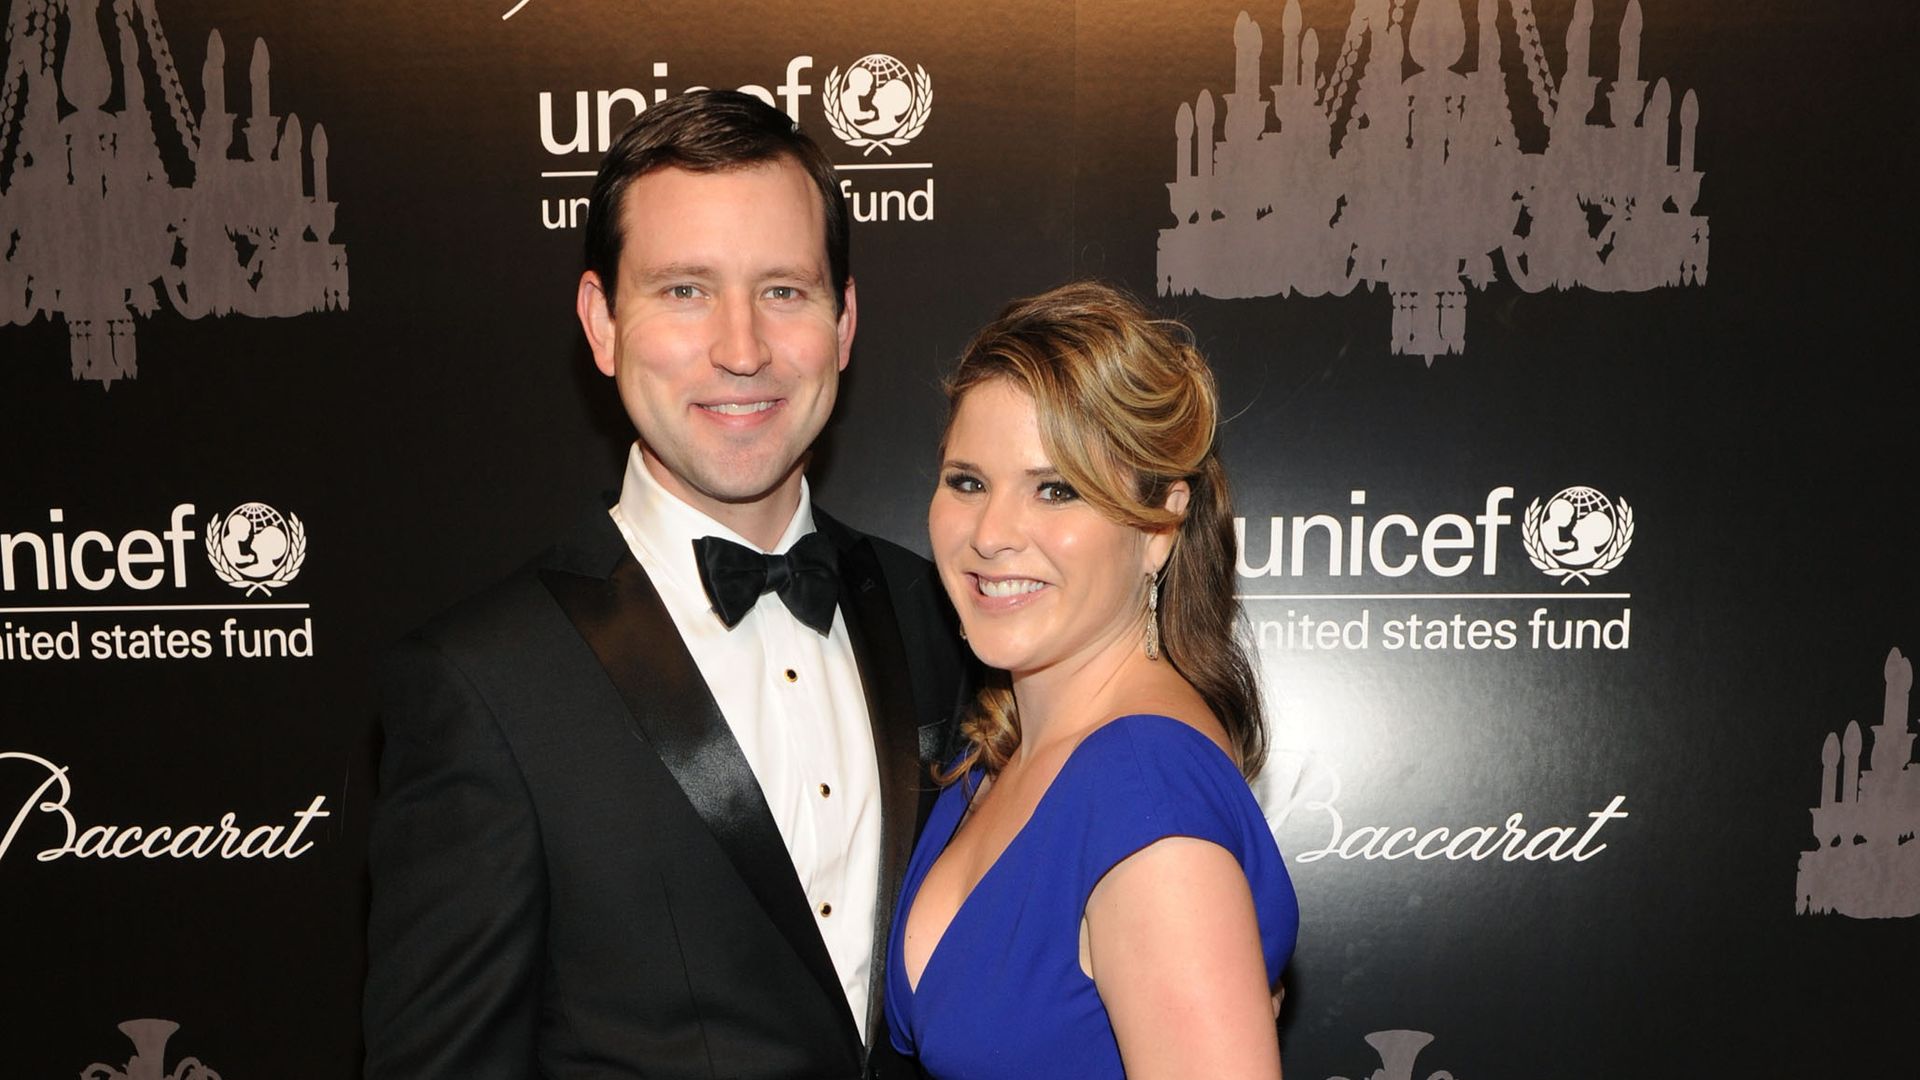 Henry Hager and Jenna Bush Hager attends the 9th annual UNICEF Snowflake Ball at Cipriani Wall Street on December 3, 2013 in New York City